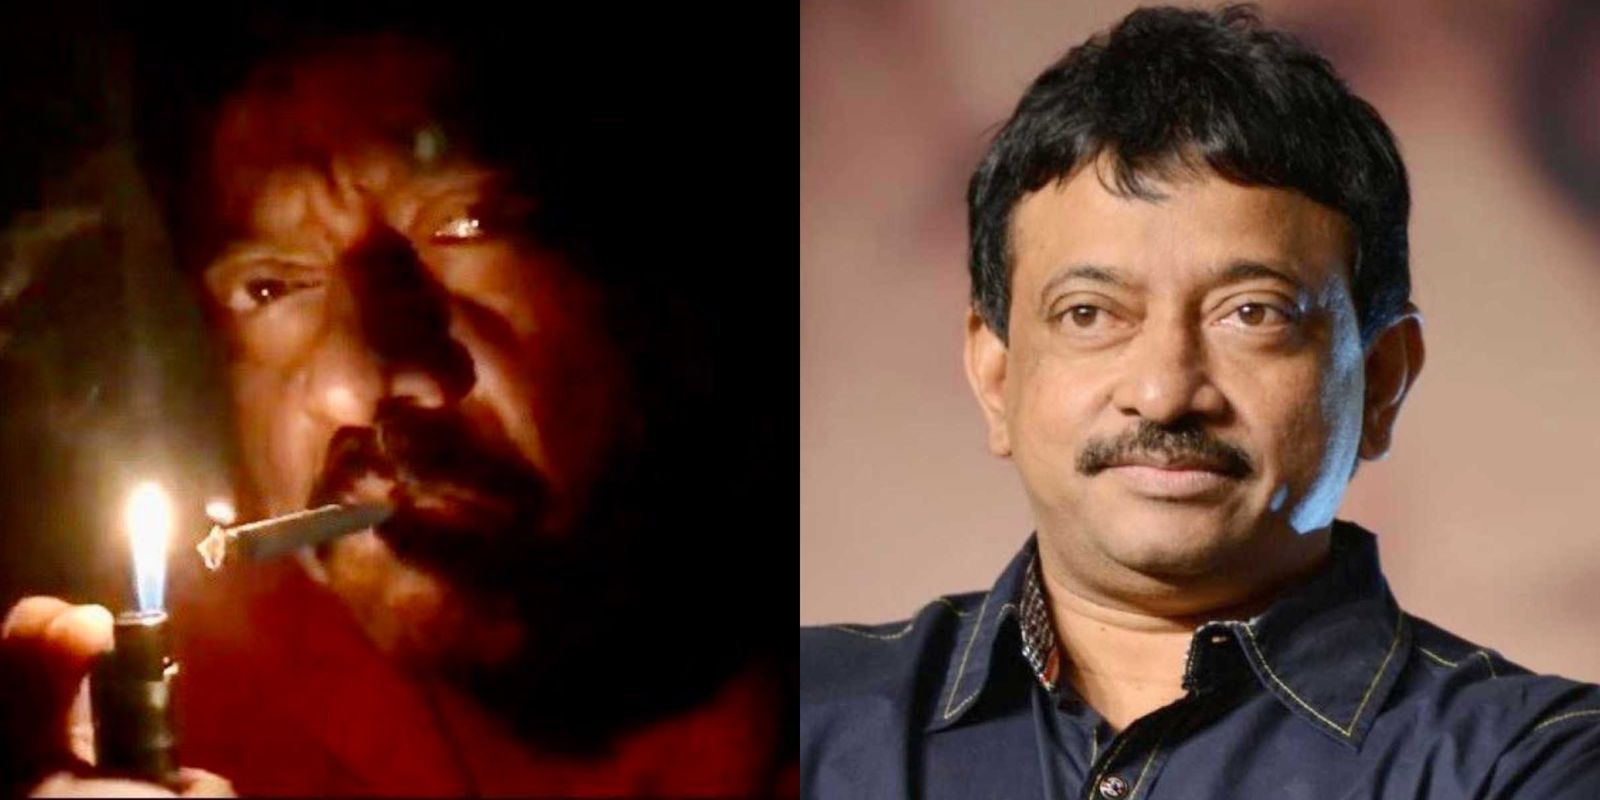 Ram Gopal Varma Lights A Cigarette Instead Of Candles During 9pm 9min Initiative; Fans Call It ‘RGV Ki Aag’